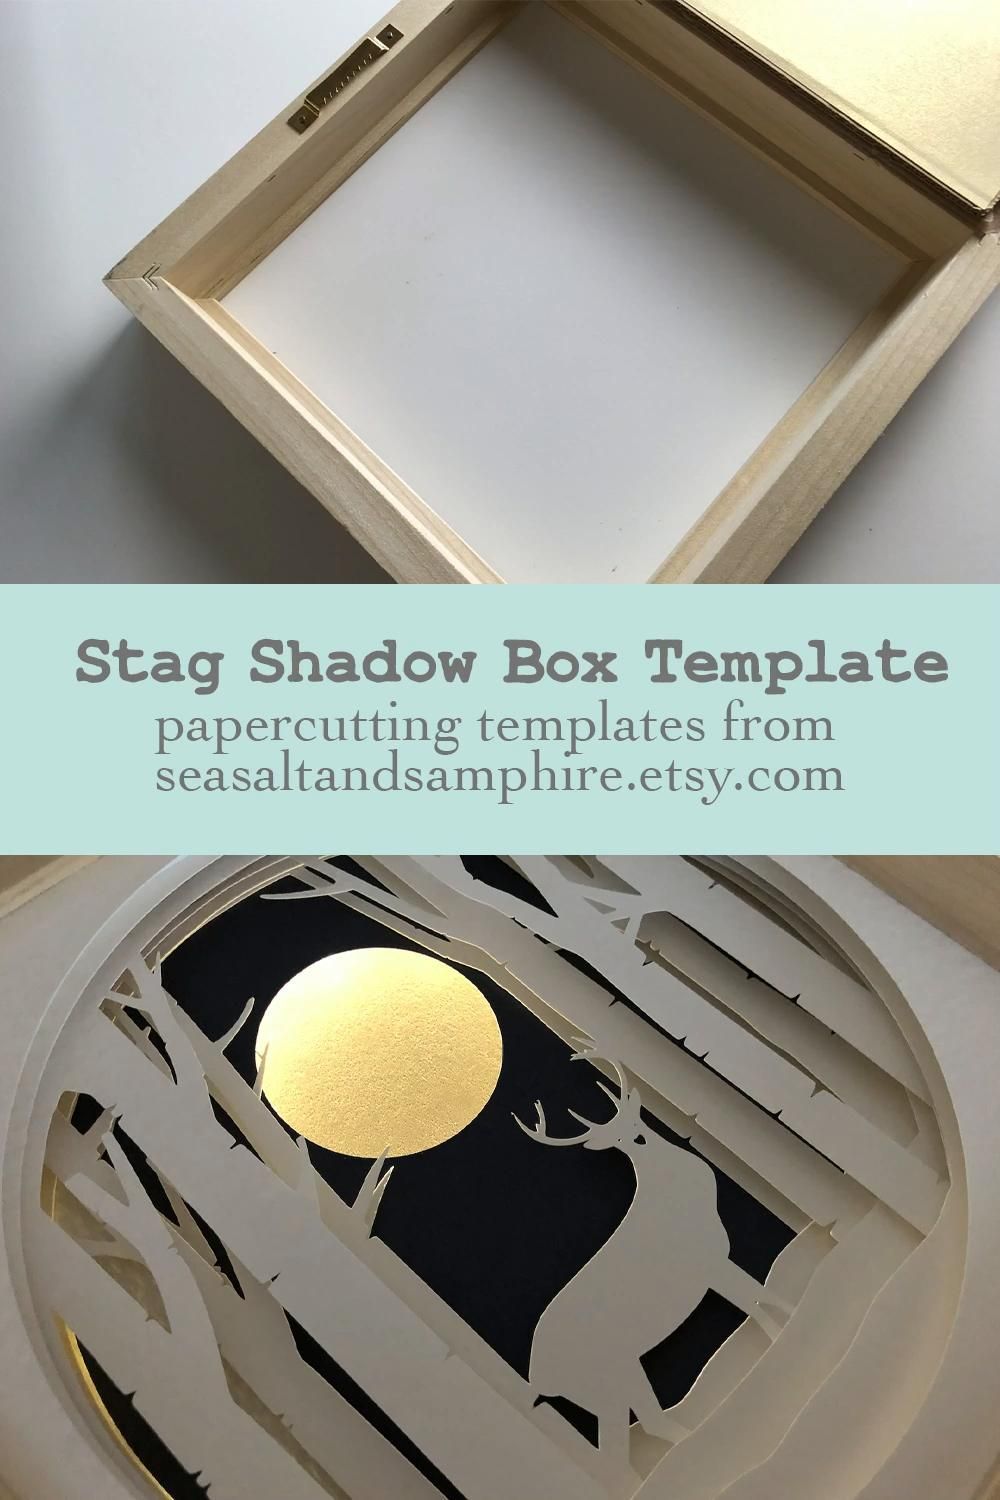 Stag light up shadow box paper cut template - Stag light up shadow box paper cut template -   19 diy Paper frame ideas